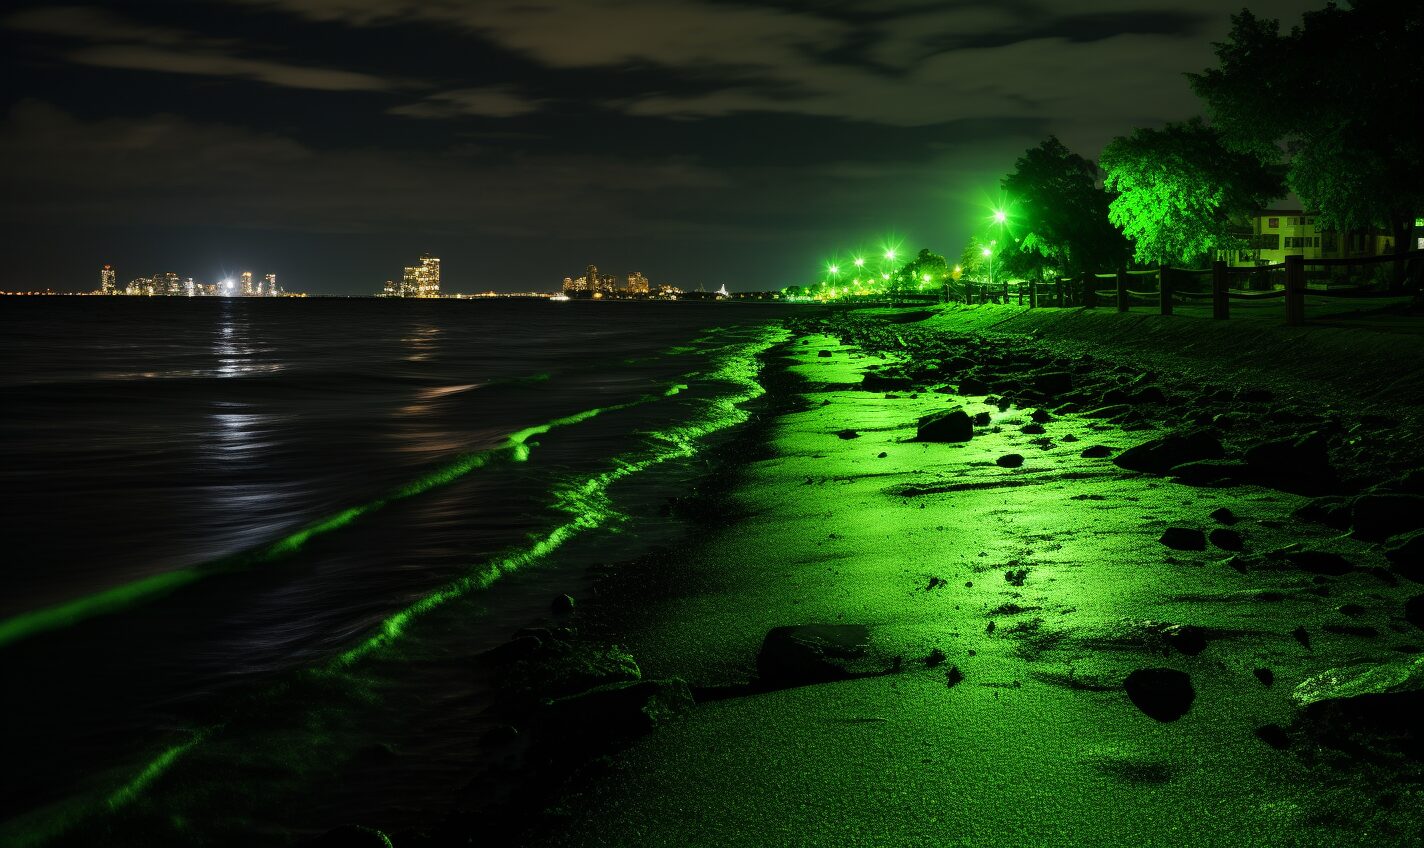 tarrytown, new york in a black and neon green glow